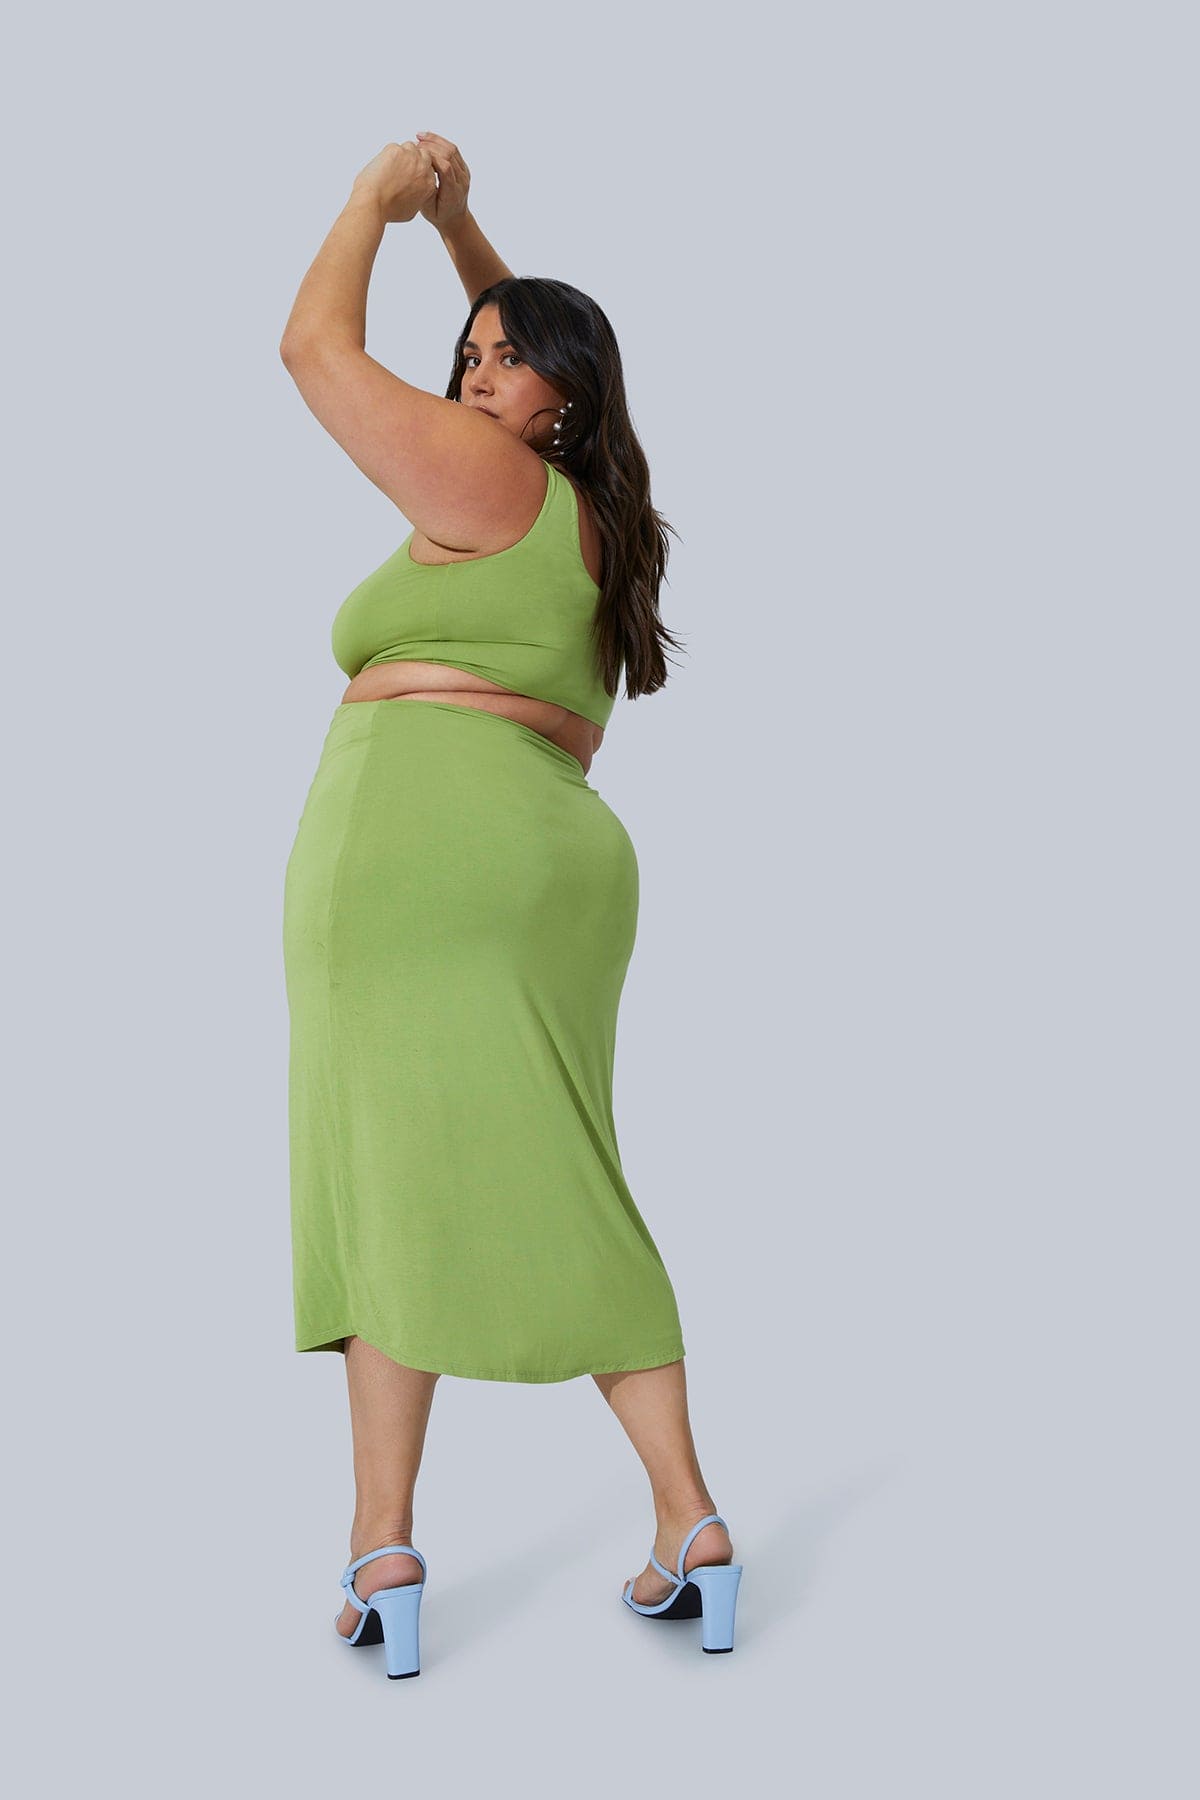 CEO and Founder of Gia IRL, Gia Sinatra Plus Size Model, posing from behind in Gigi Midi Dress size 1X. Dress is in Pistachio color and is paired with light blue strappy heels.